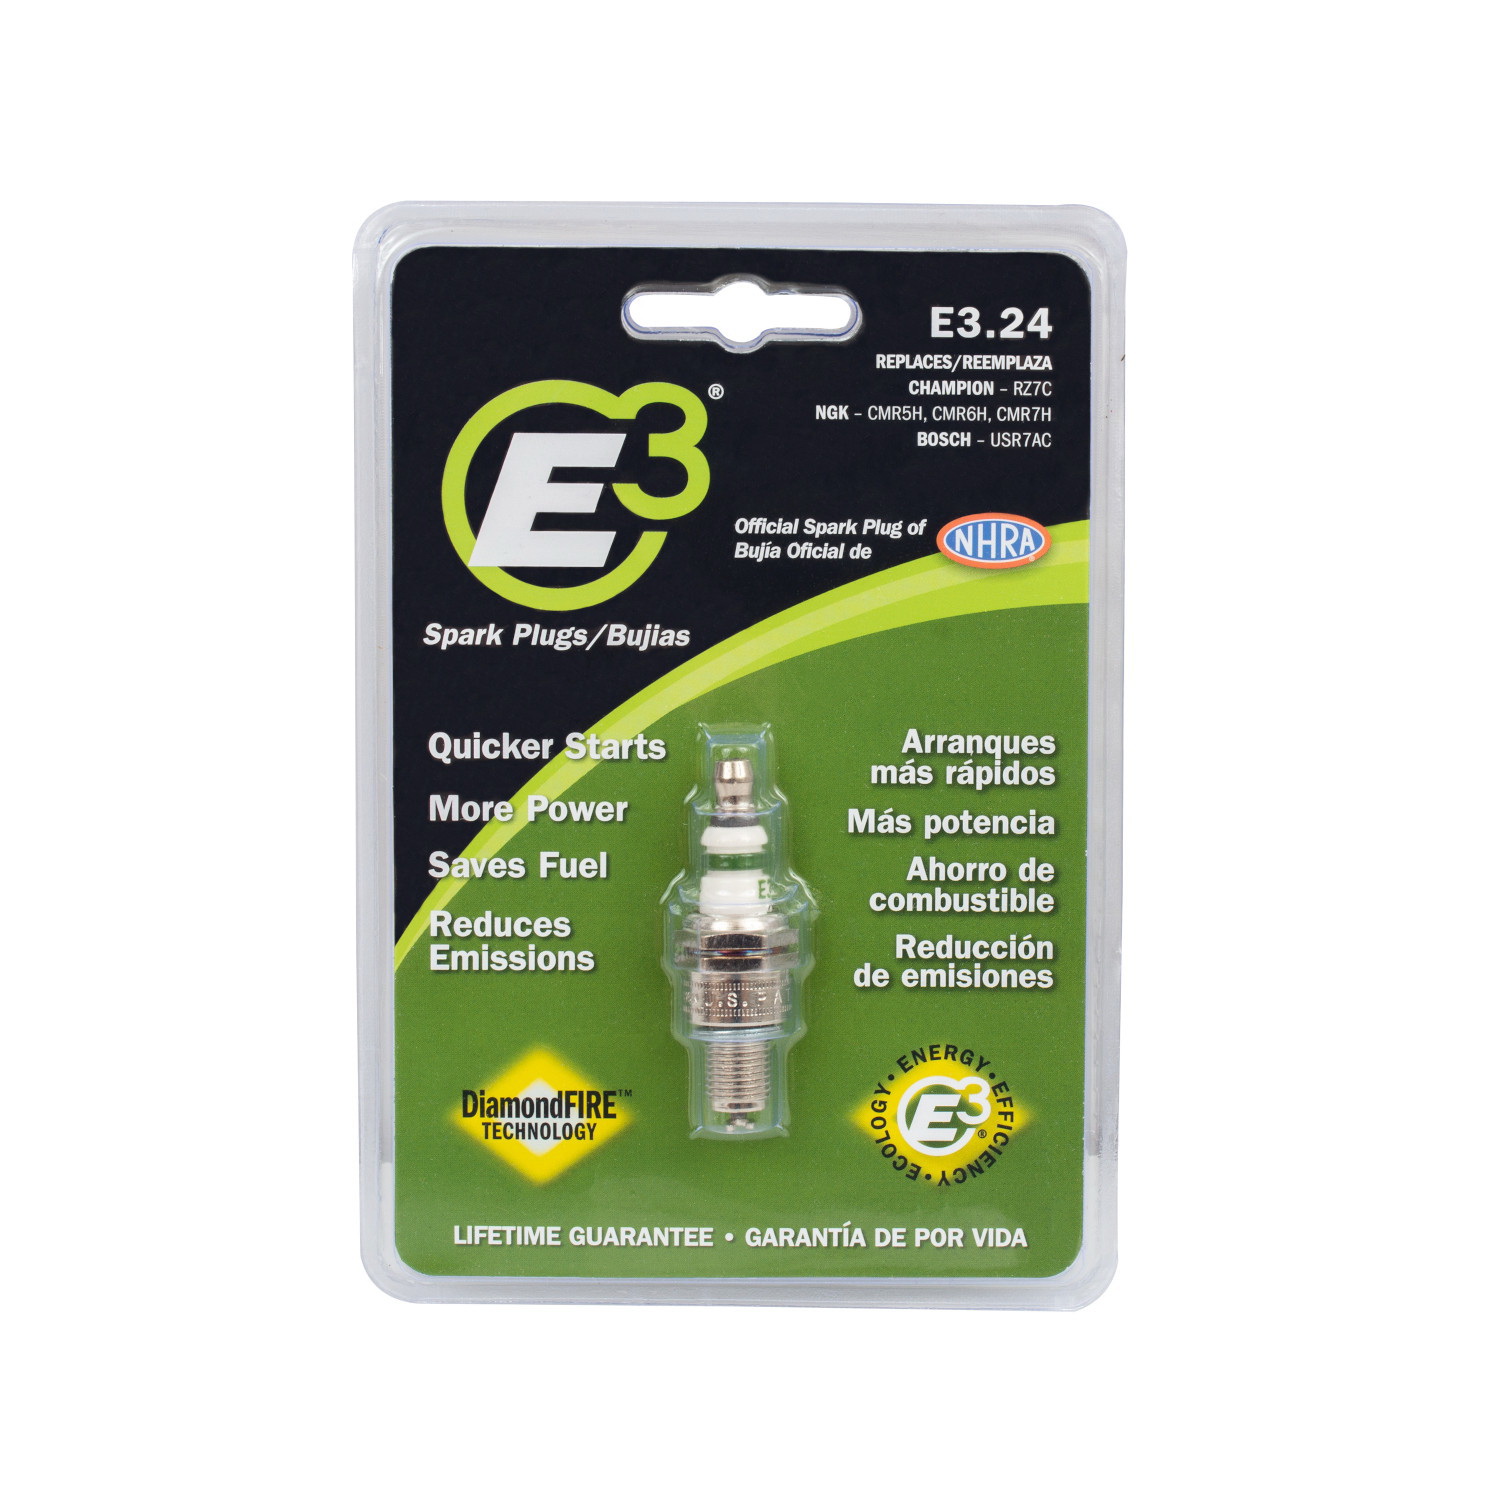 E3 E3.24 Spark Plug, 10 mm Thread, 5/8 in Hex, For: 2-Cycle, 4-Cycle Engines - 3